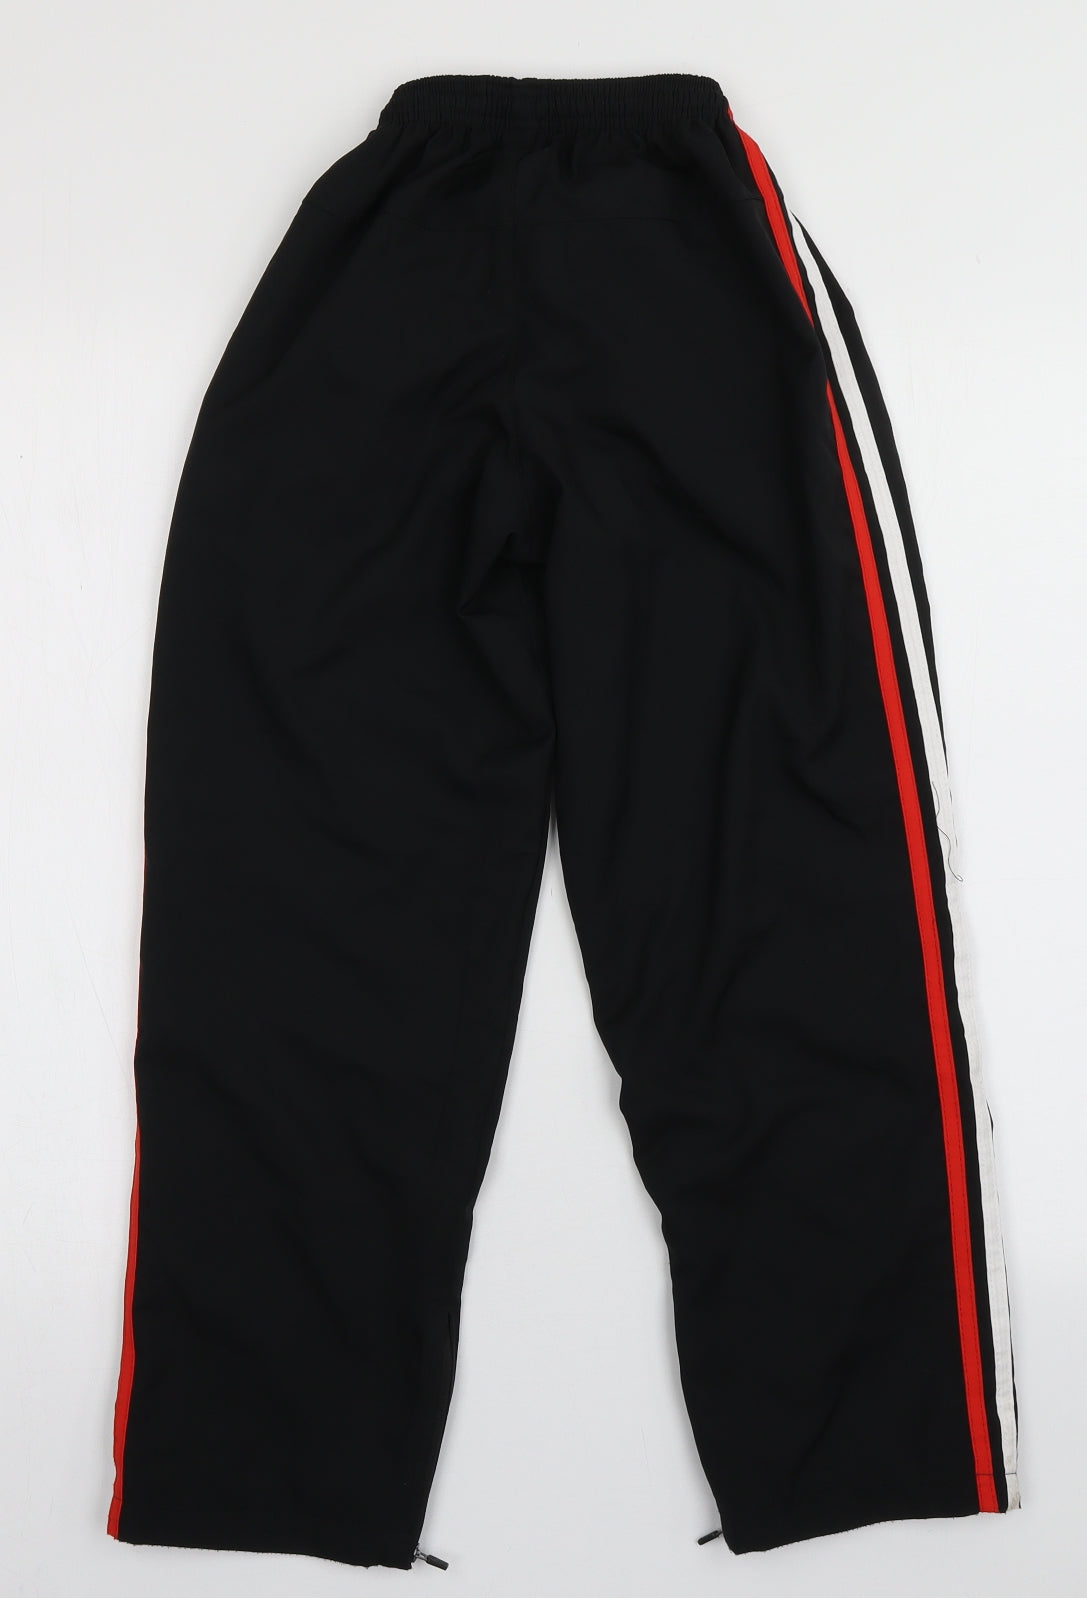 ONeills Boys Black Striped Polyester Jogger Trousers Size 9-10 Years  Regular Tie - Middlewich Town FC